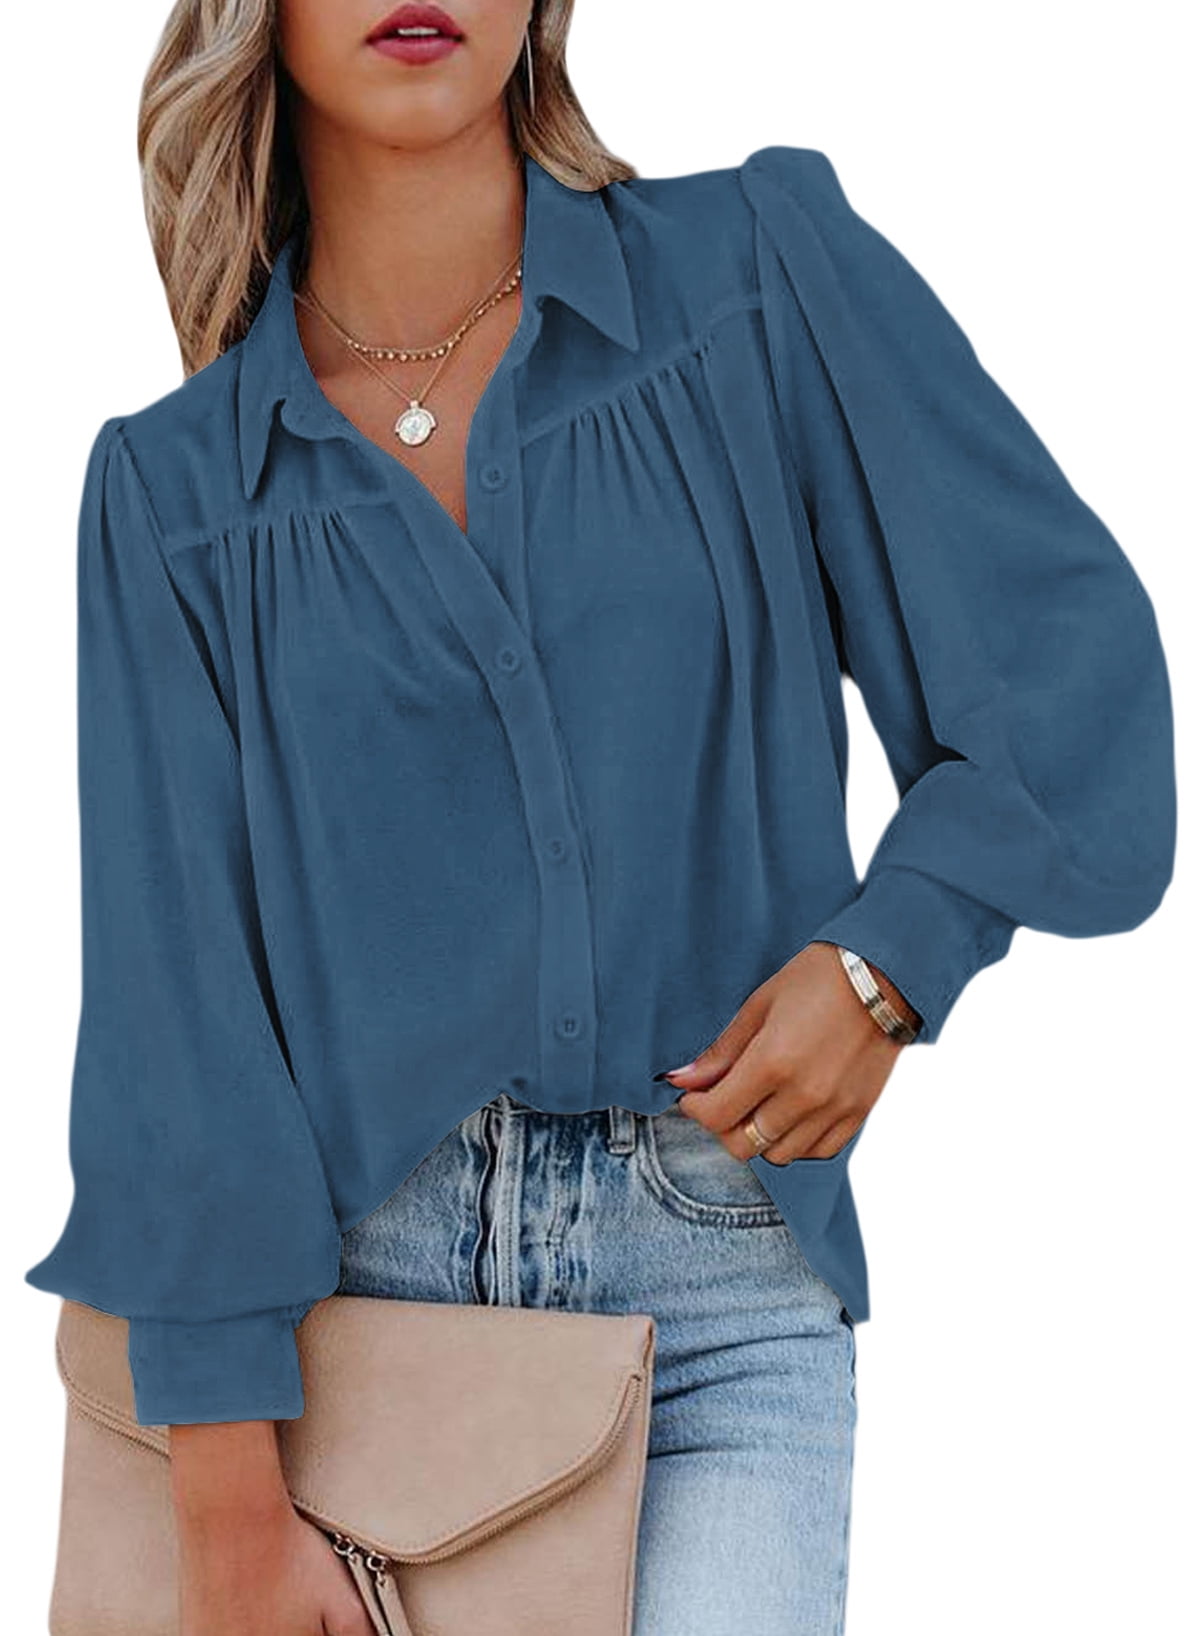 FARYSAYS Womens Long Sleeve Blouses and Tops Button Up Lightweight